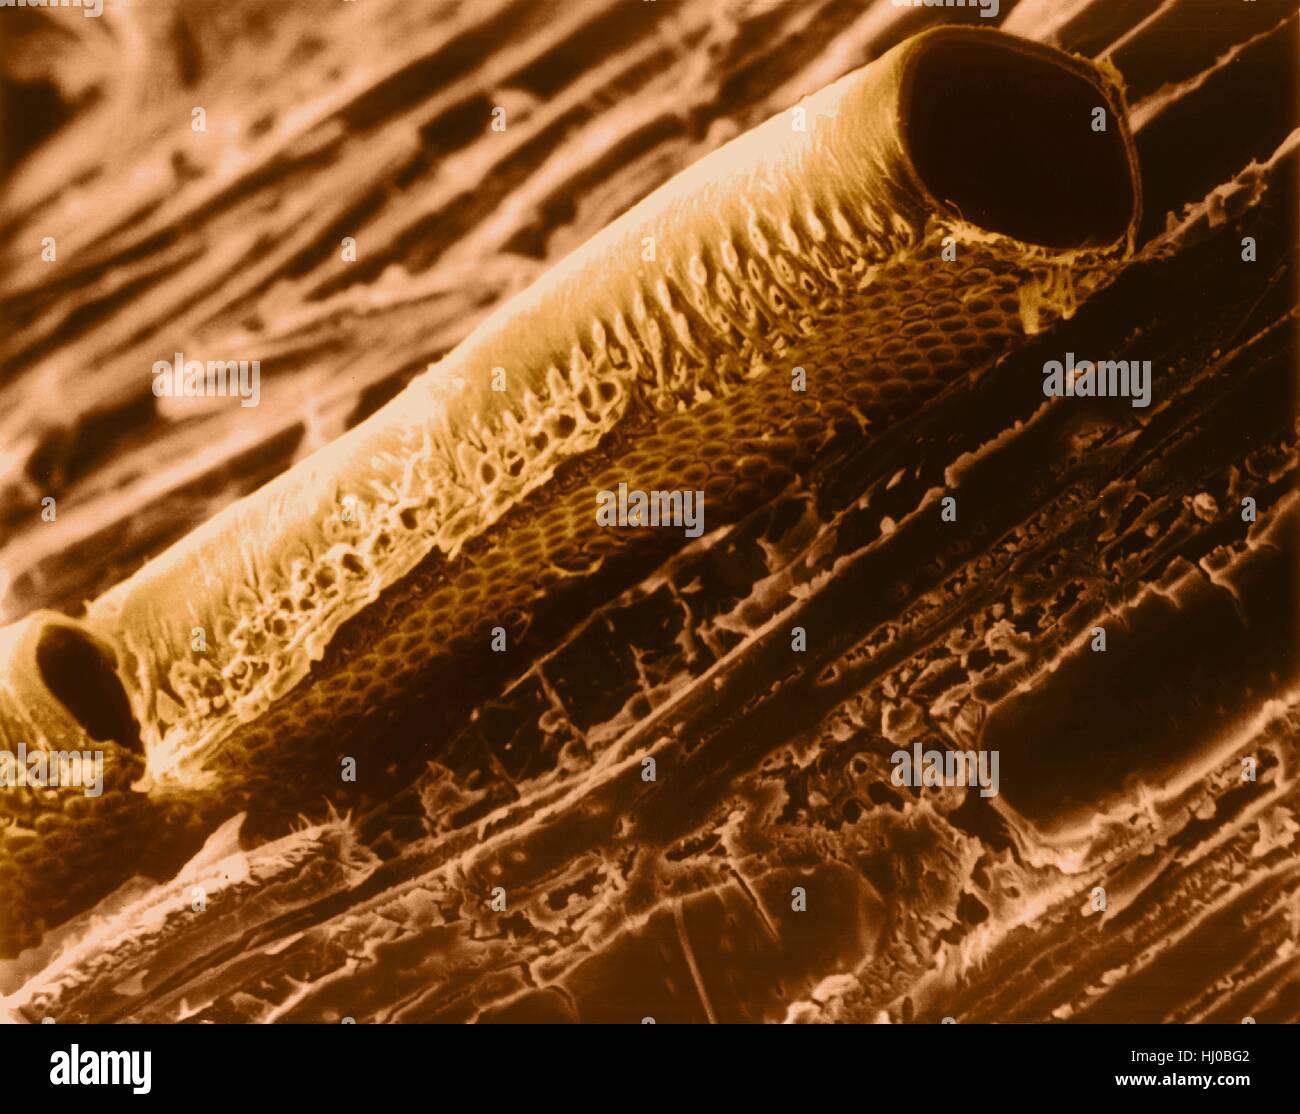 Conductive vessel element in mountain mahogany wood (Cercocarpus sp),coloured scanning electron micrograph (SEM).Note bordered pits in cellulose wall.A conductive vessel element is elongated,water-conducting cell in xylem,one of two kinds of tracheary elements.The cells die when mature,leaving only Stock Photo